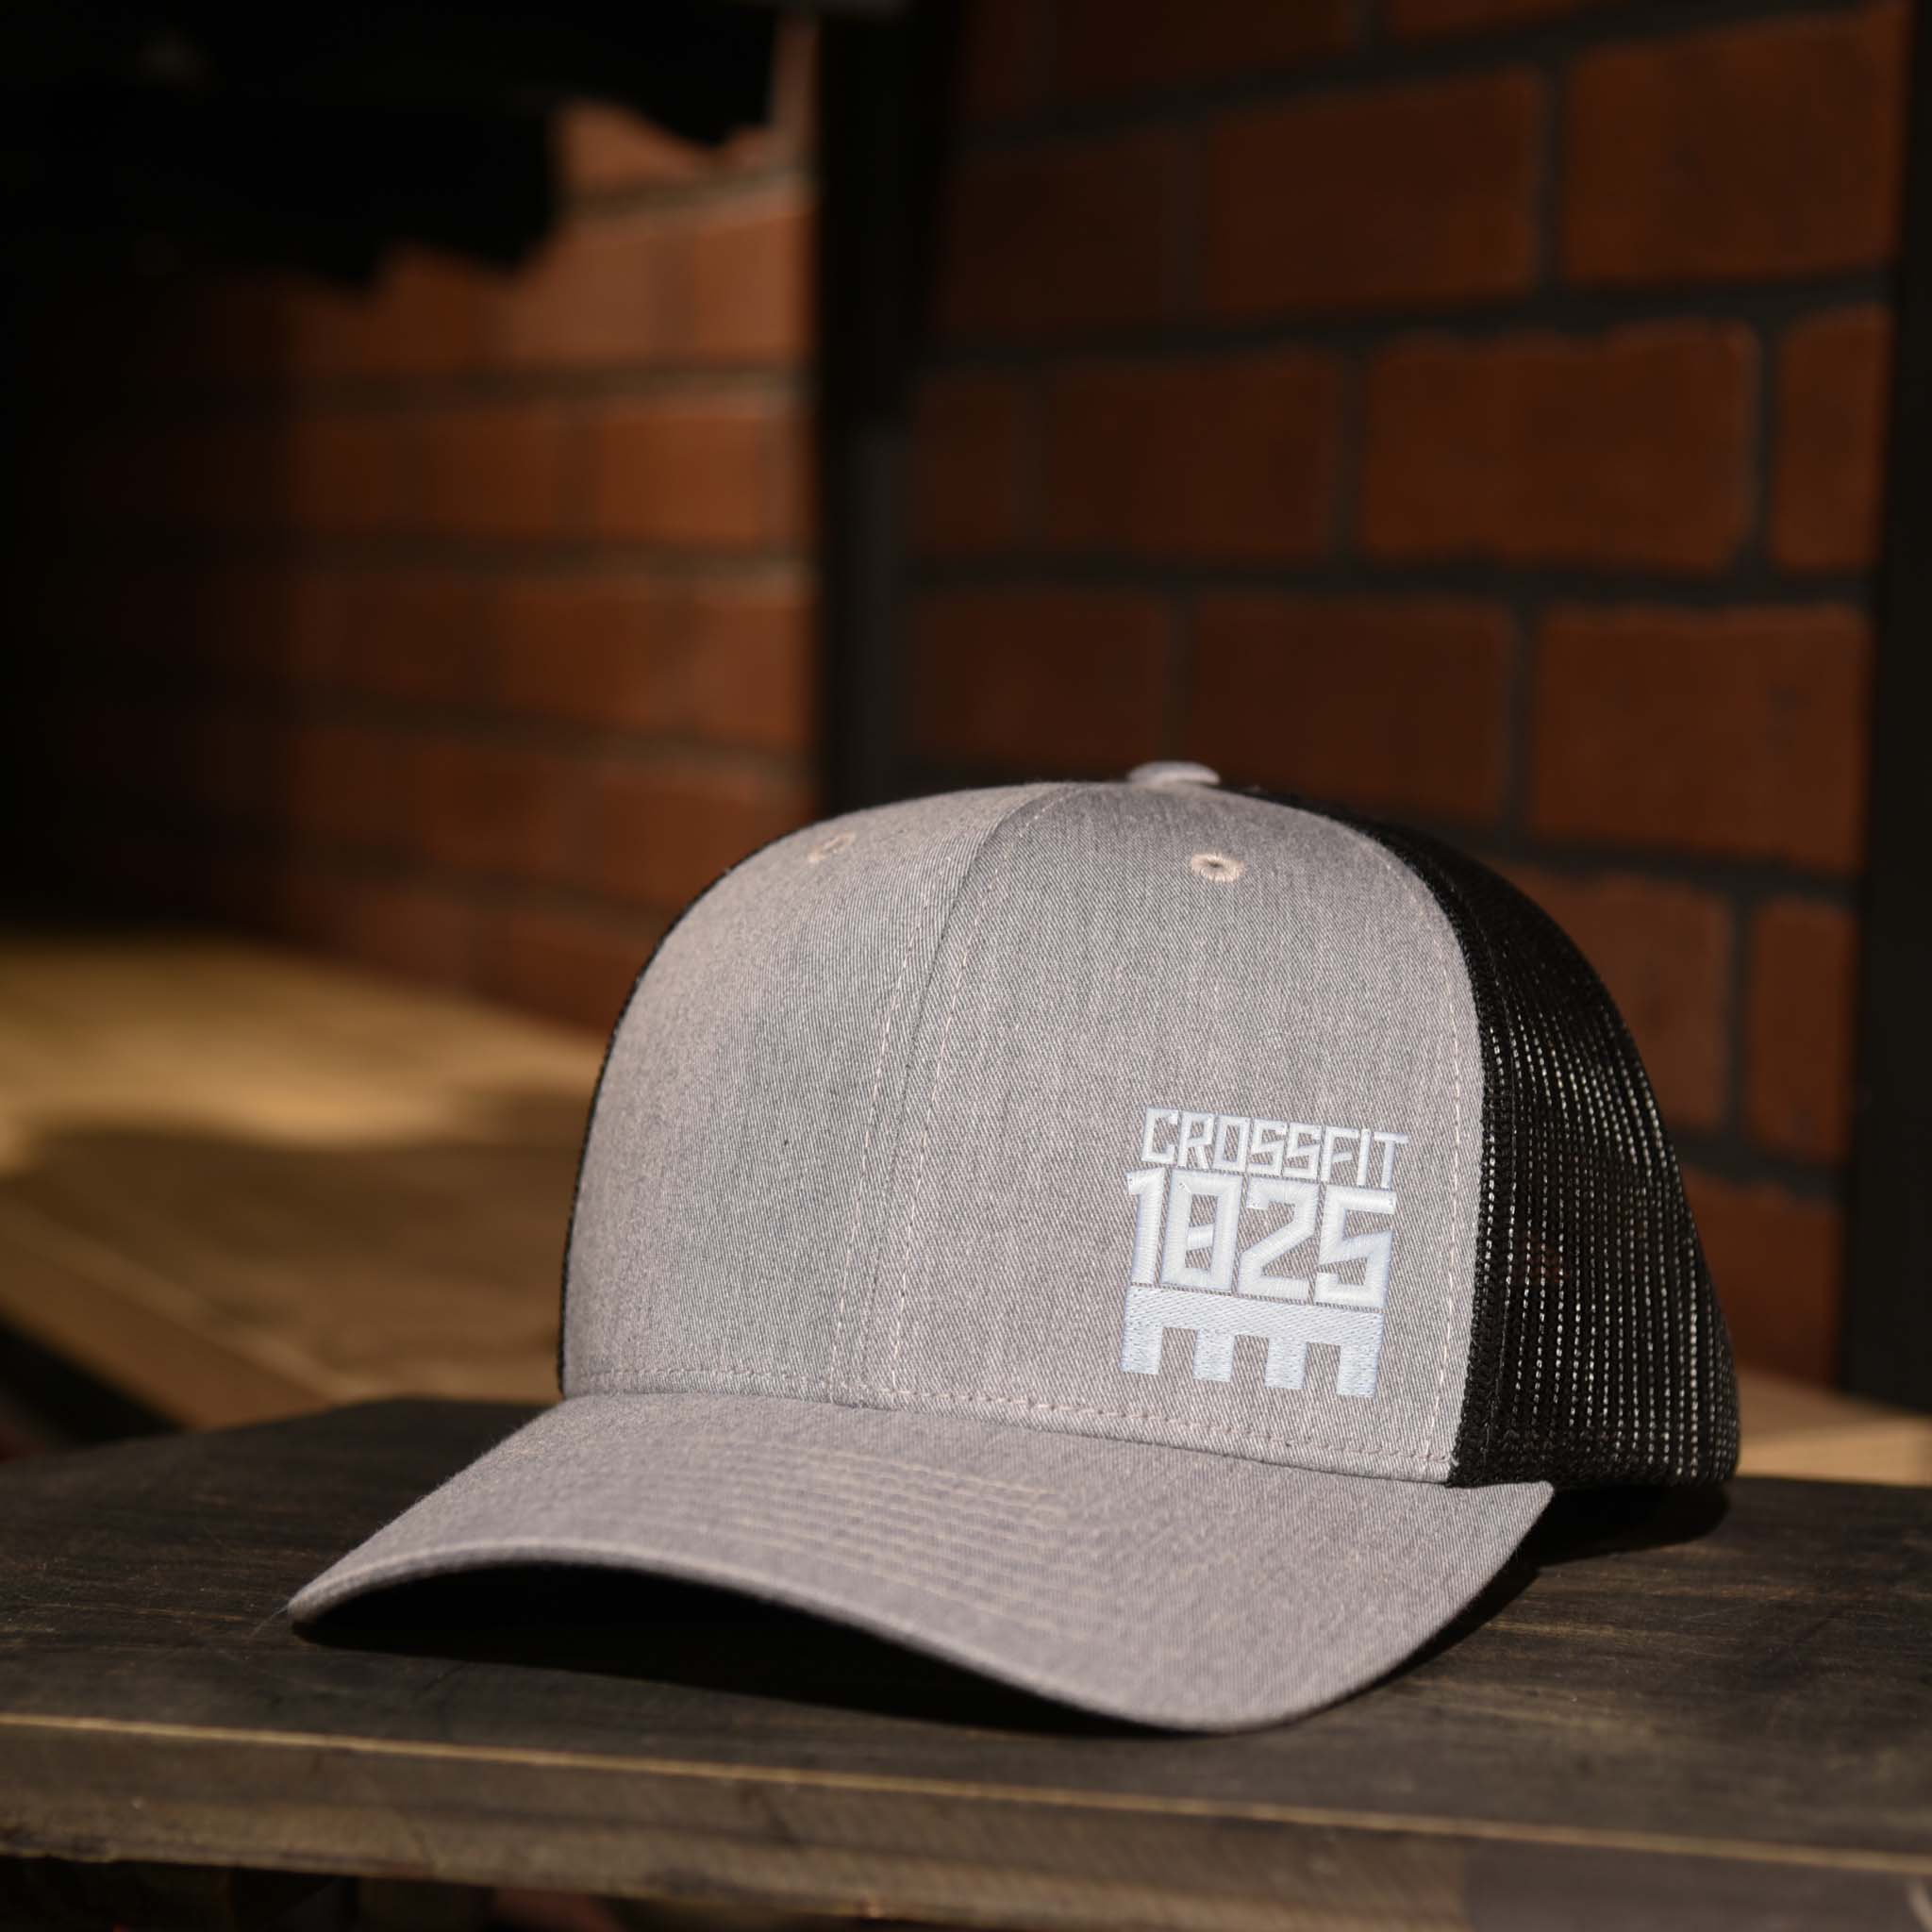 CrossFit 1825 White Embroidered Logo Trucker Hat in Heather Gray and Black